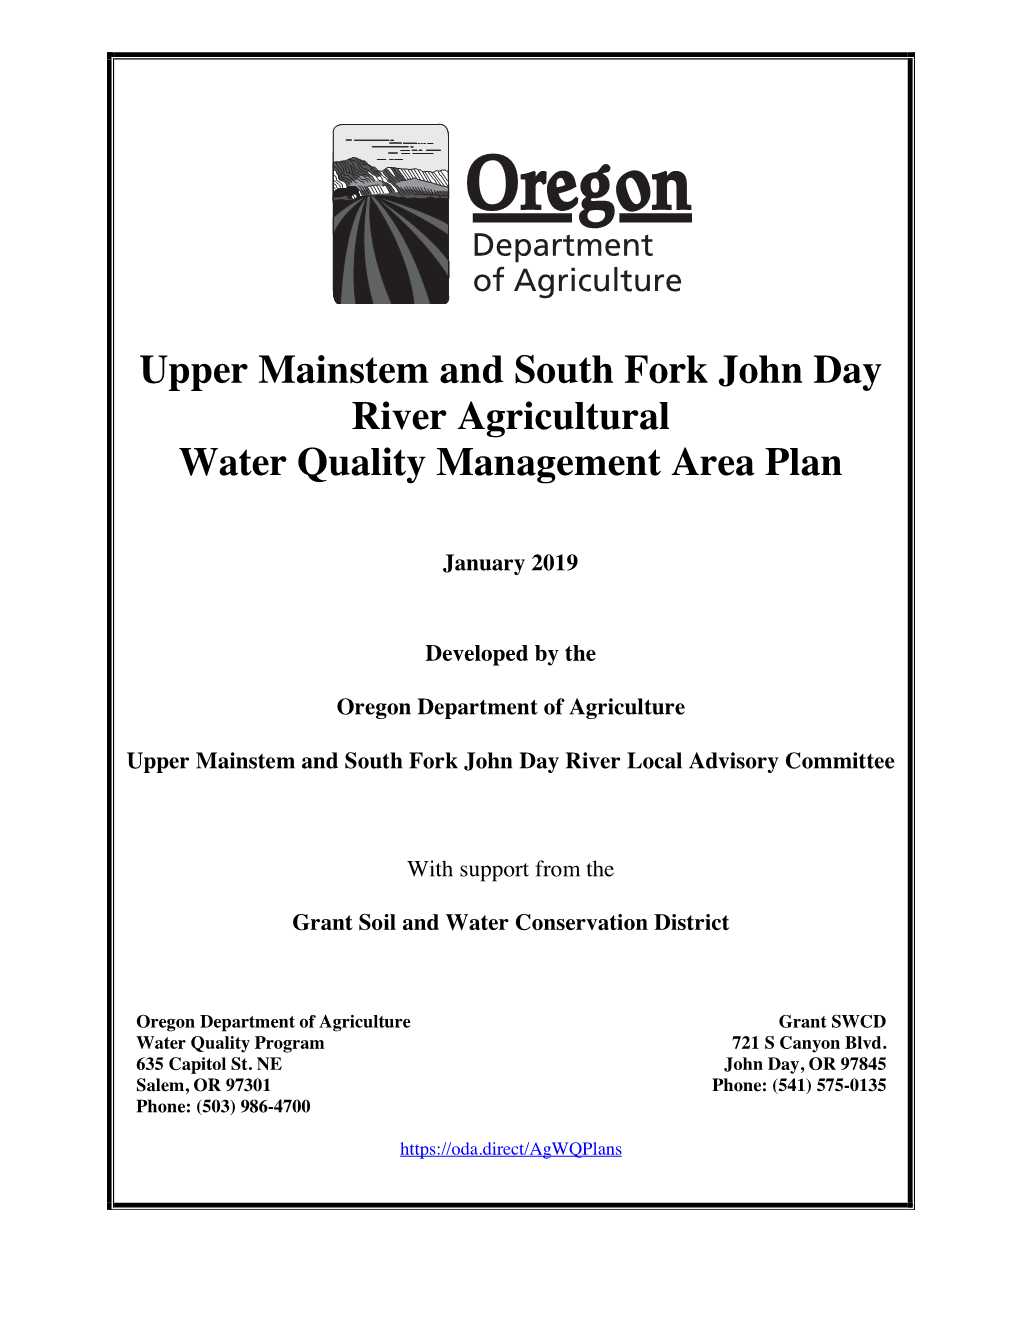 Upper Mainstem and South Fork John Day River Agricultural Water Quality Management Area Plan